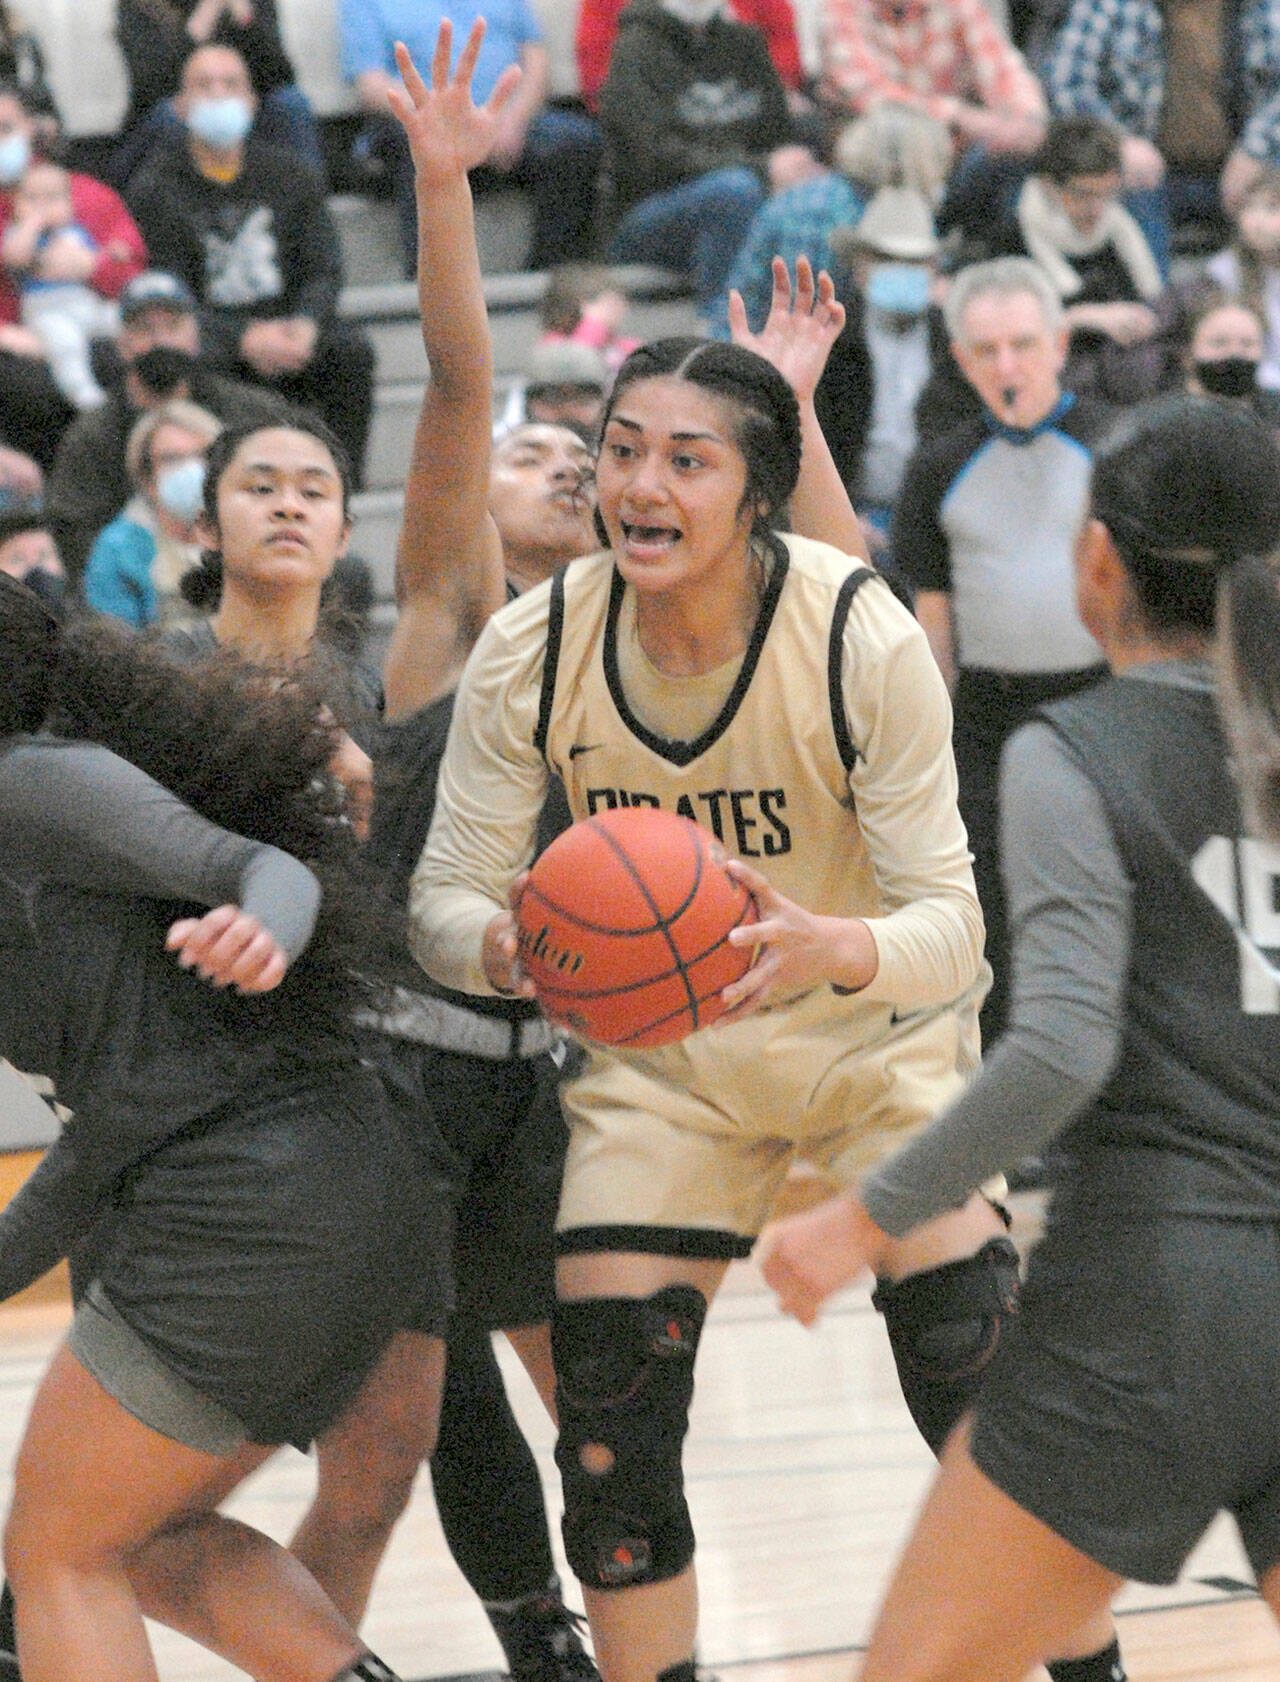 Peninsula’s Ituau Tuisaula finds herself surrounded by the Shoreline defense during Wednesday’s game in Port Angeles. (Keith Thorpe/Peninsula Daily News)